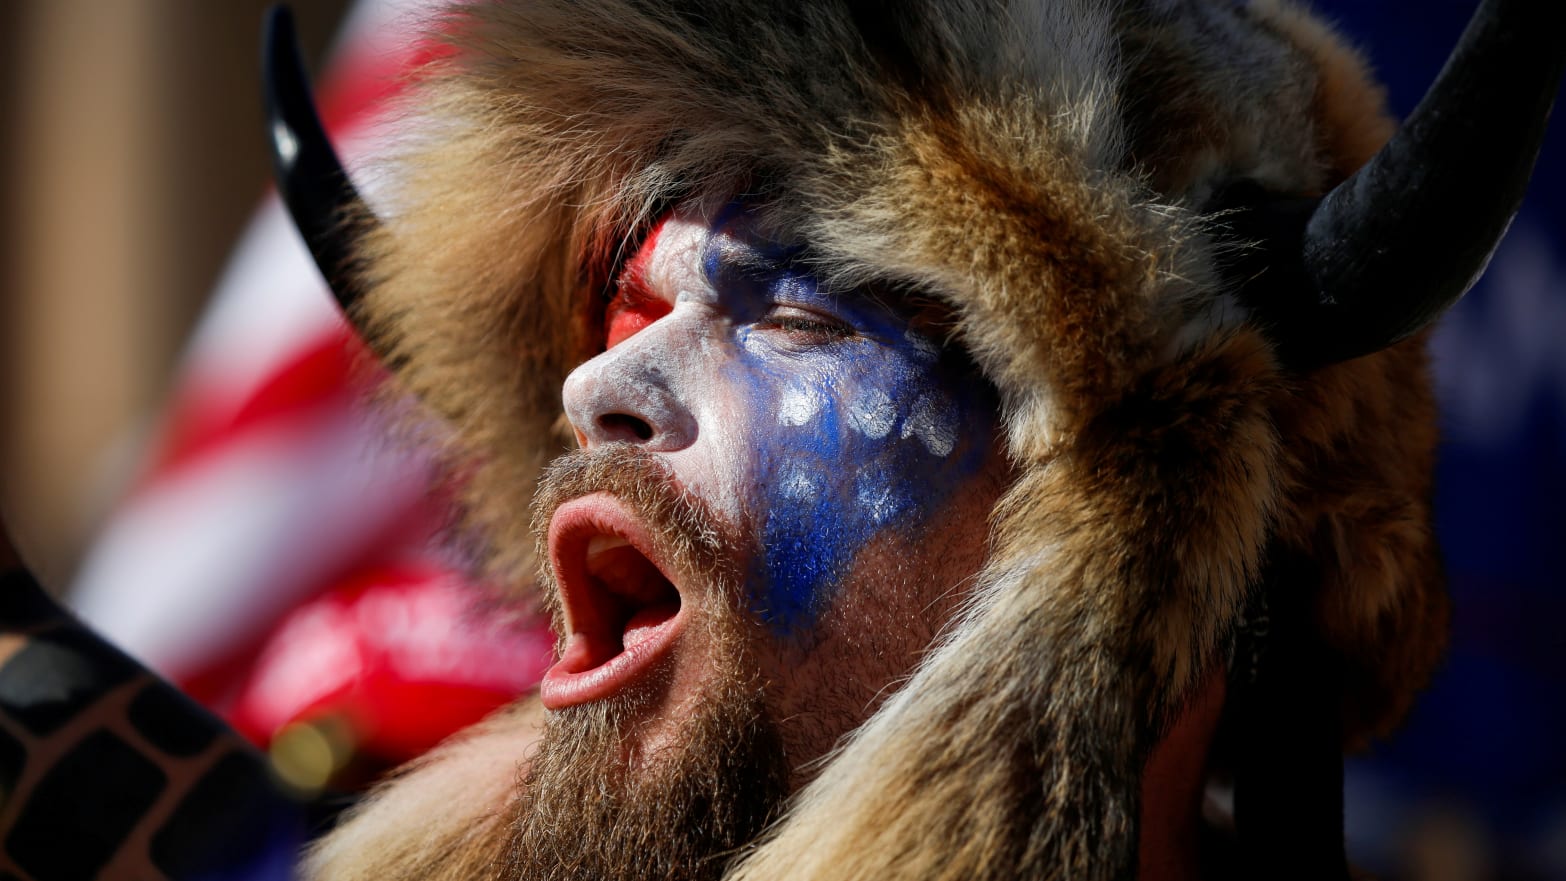 Jacob Chansley, wearing face paint and a fur hat, screams during a protest.